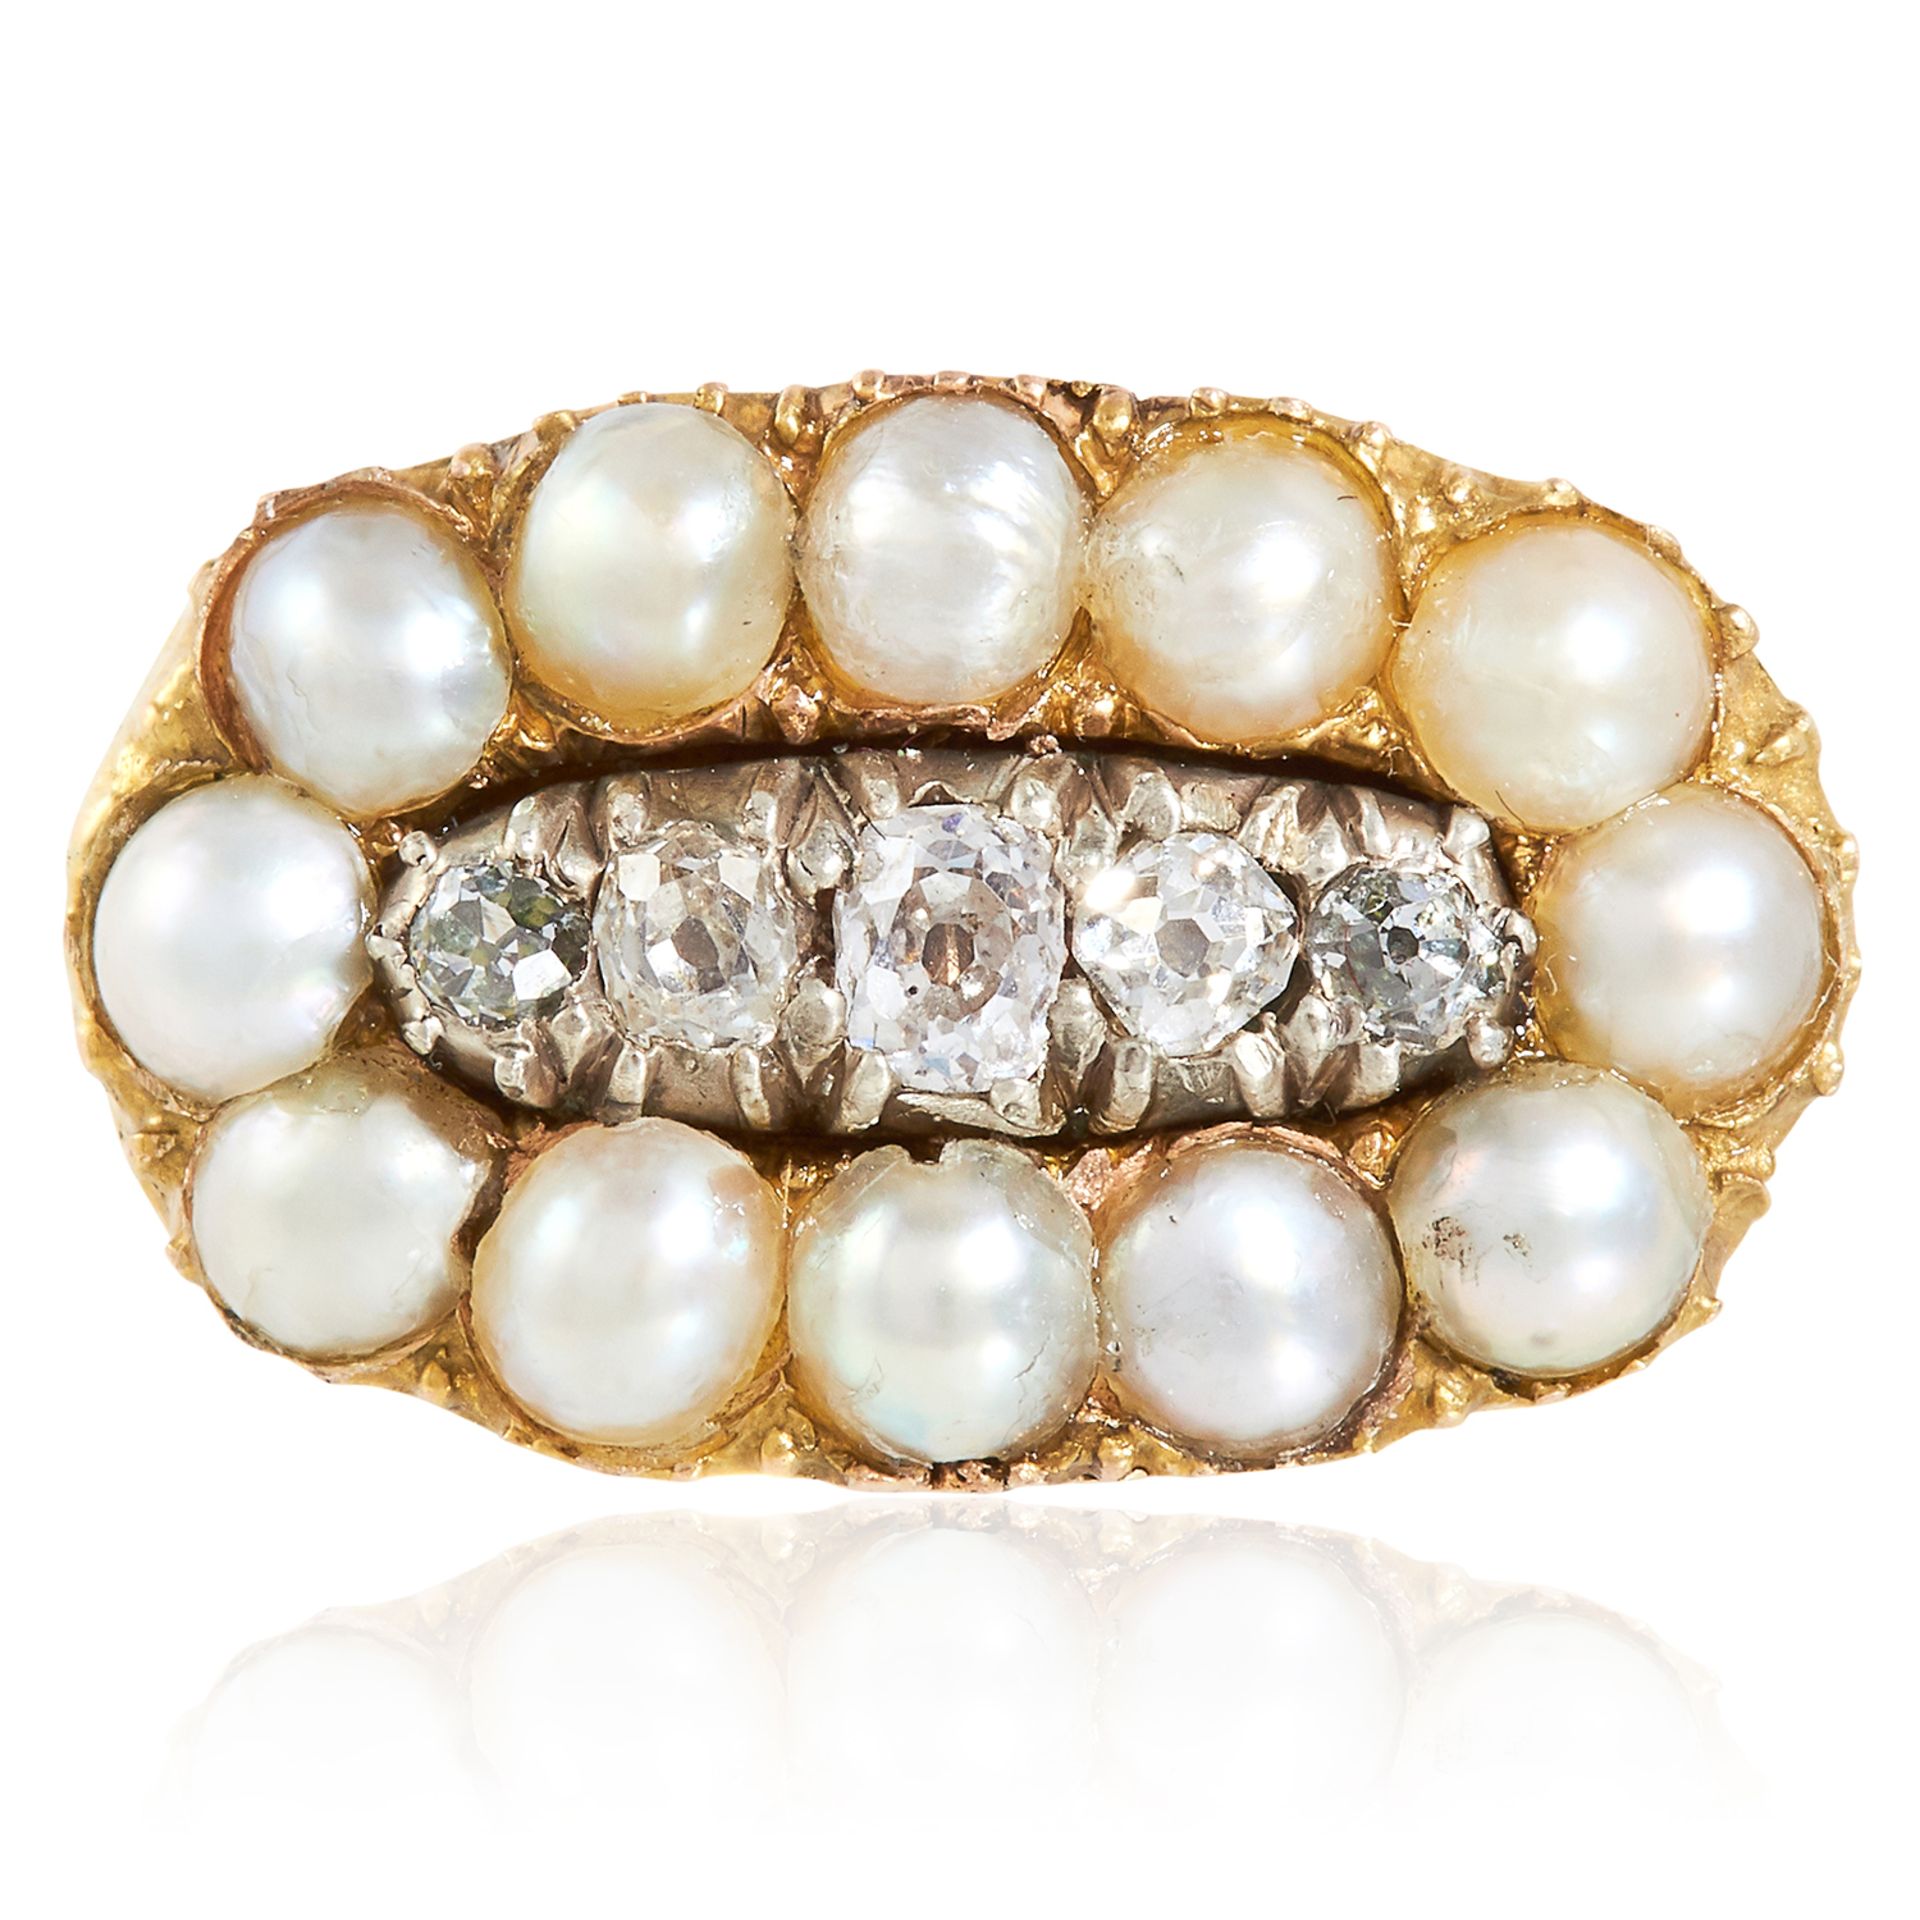 A PEARL AND DIAMOND DRESS RING in high carat yellow gold, set with a row of old cut diamonds in a